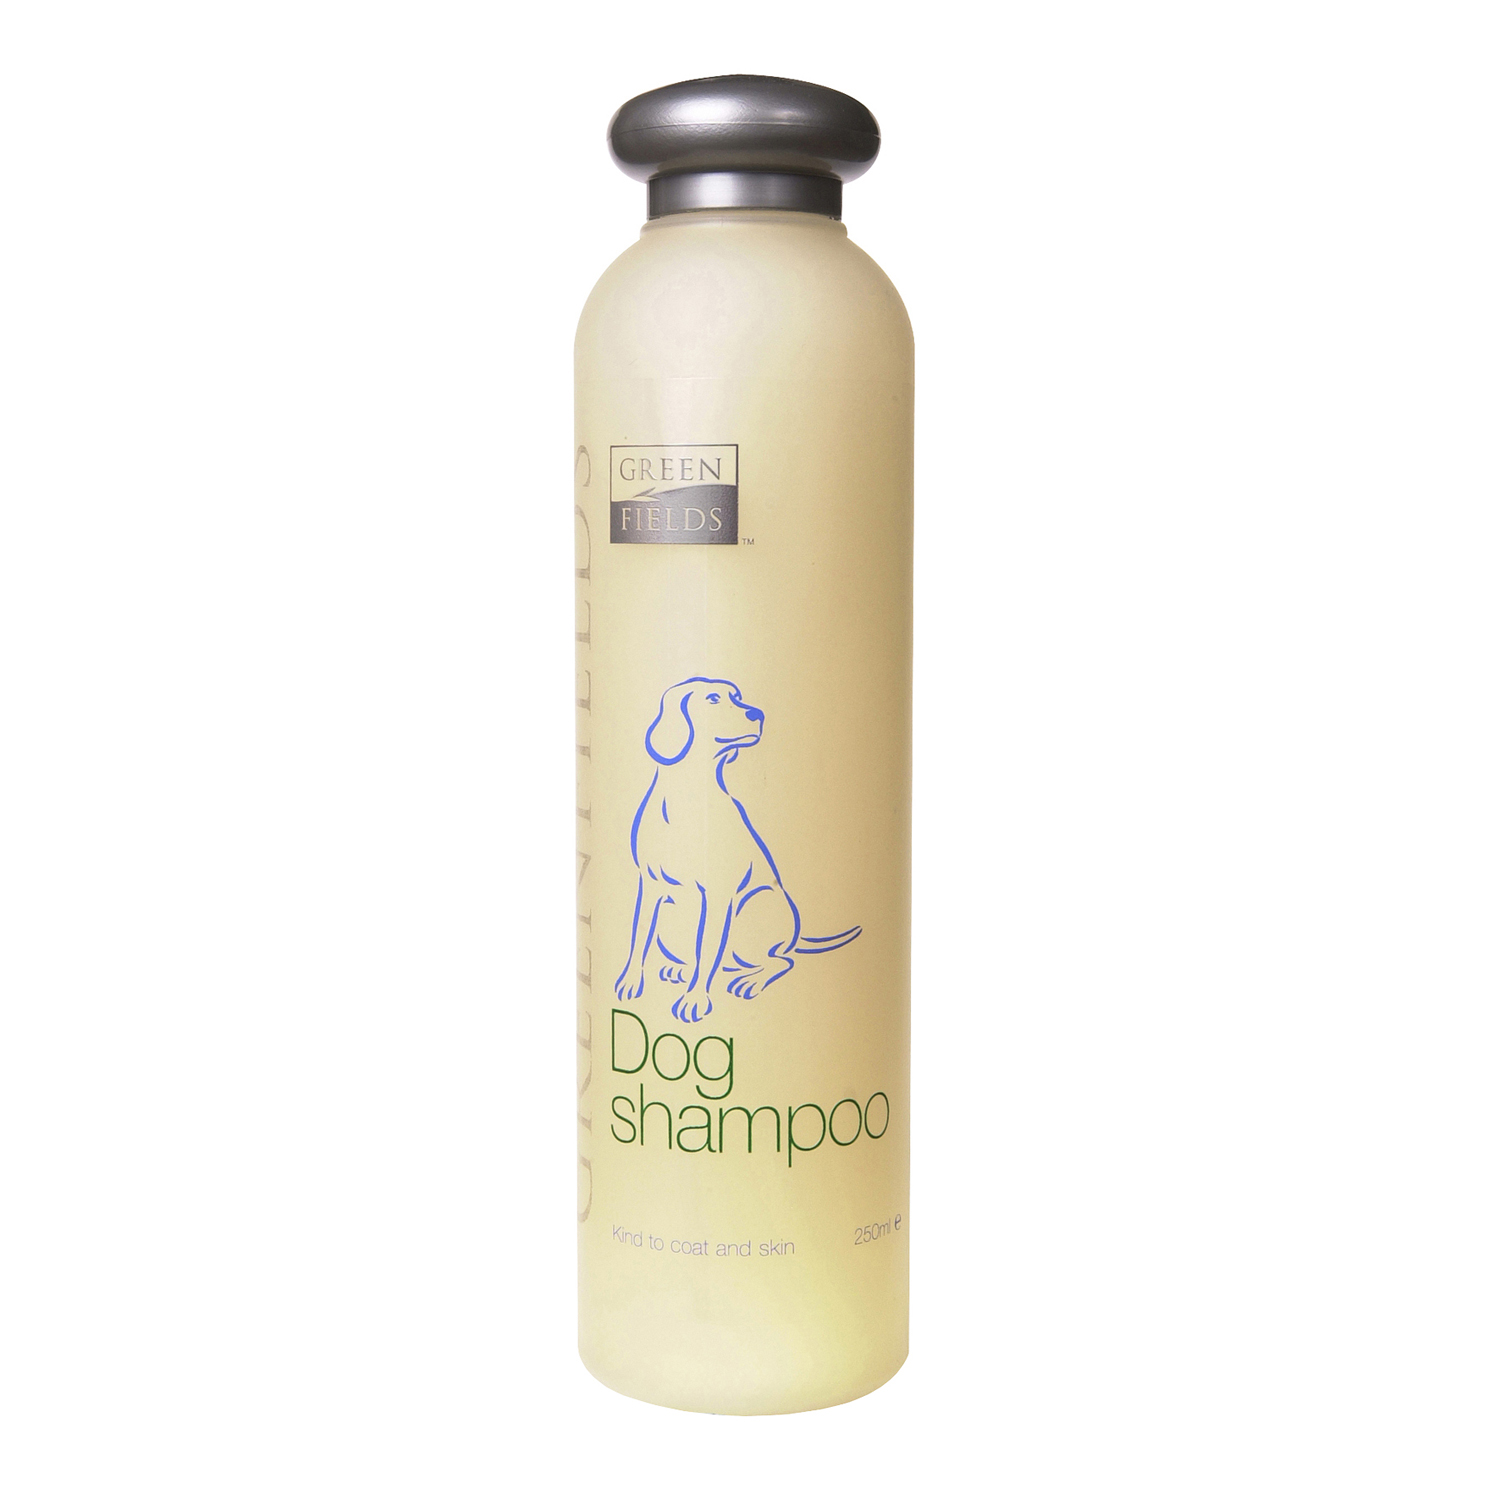 Greenfields Dog Shampoo and Conditioner 250ml